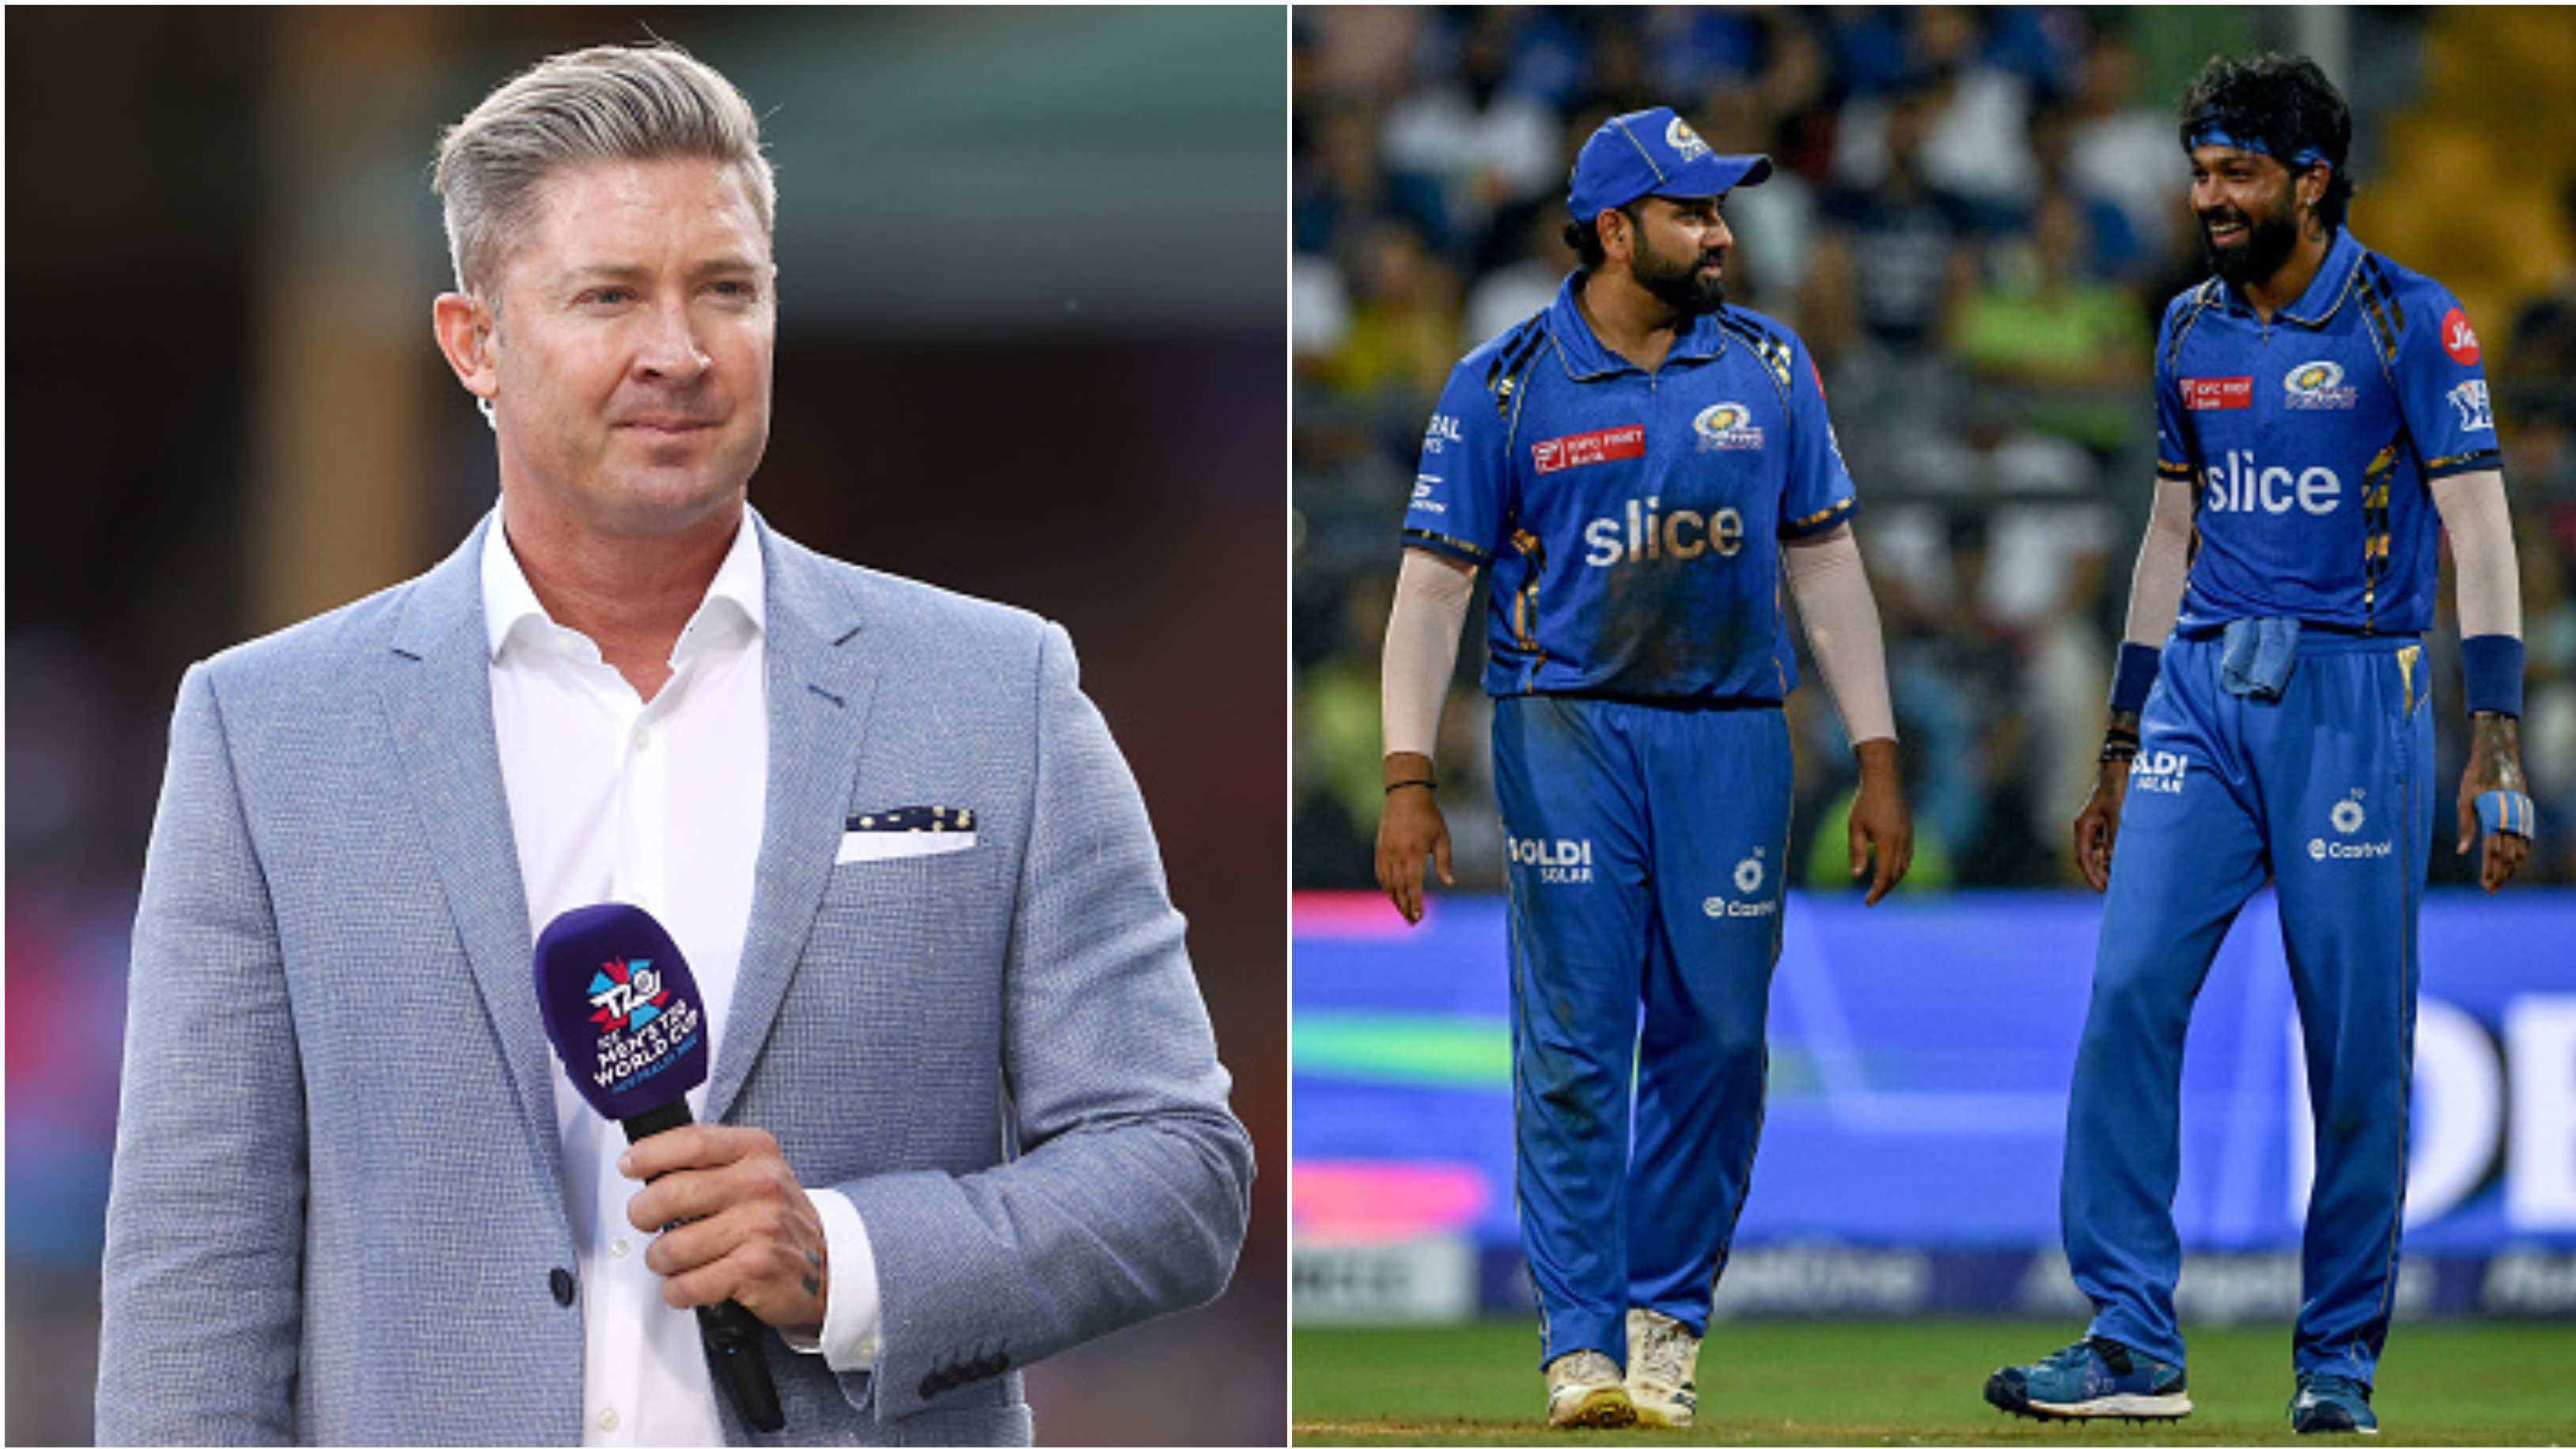 'If the beef was strong, he wouldn't be in that World Cup campaign': Michael Clarke’s take on Rohit-Hardik issue